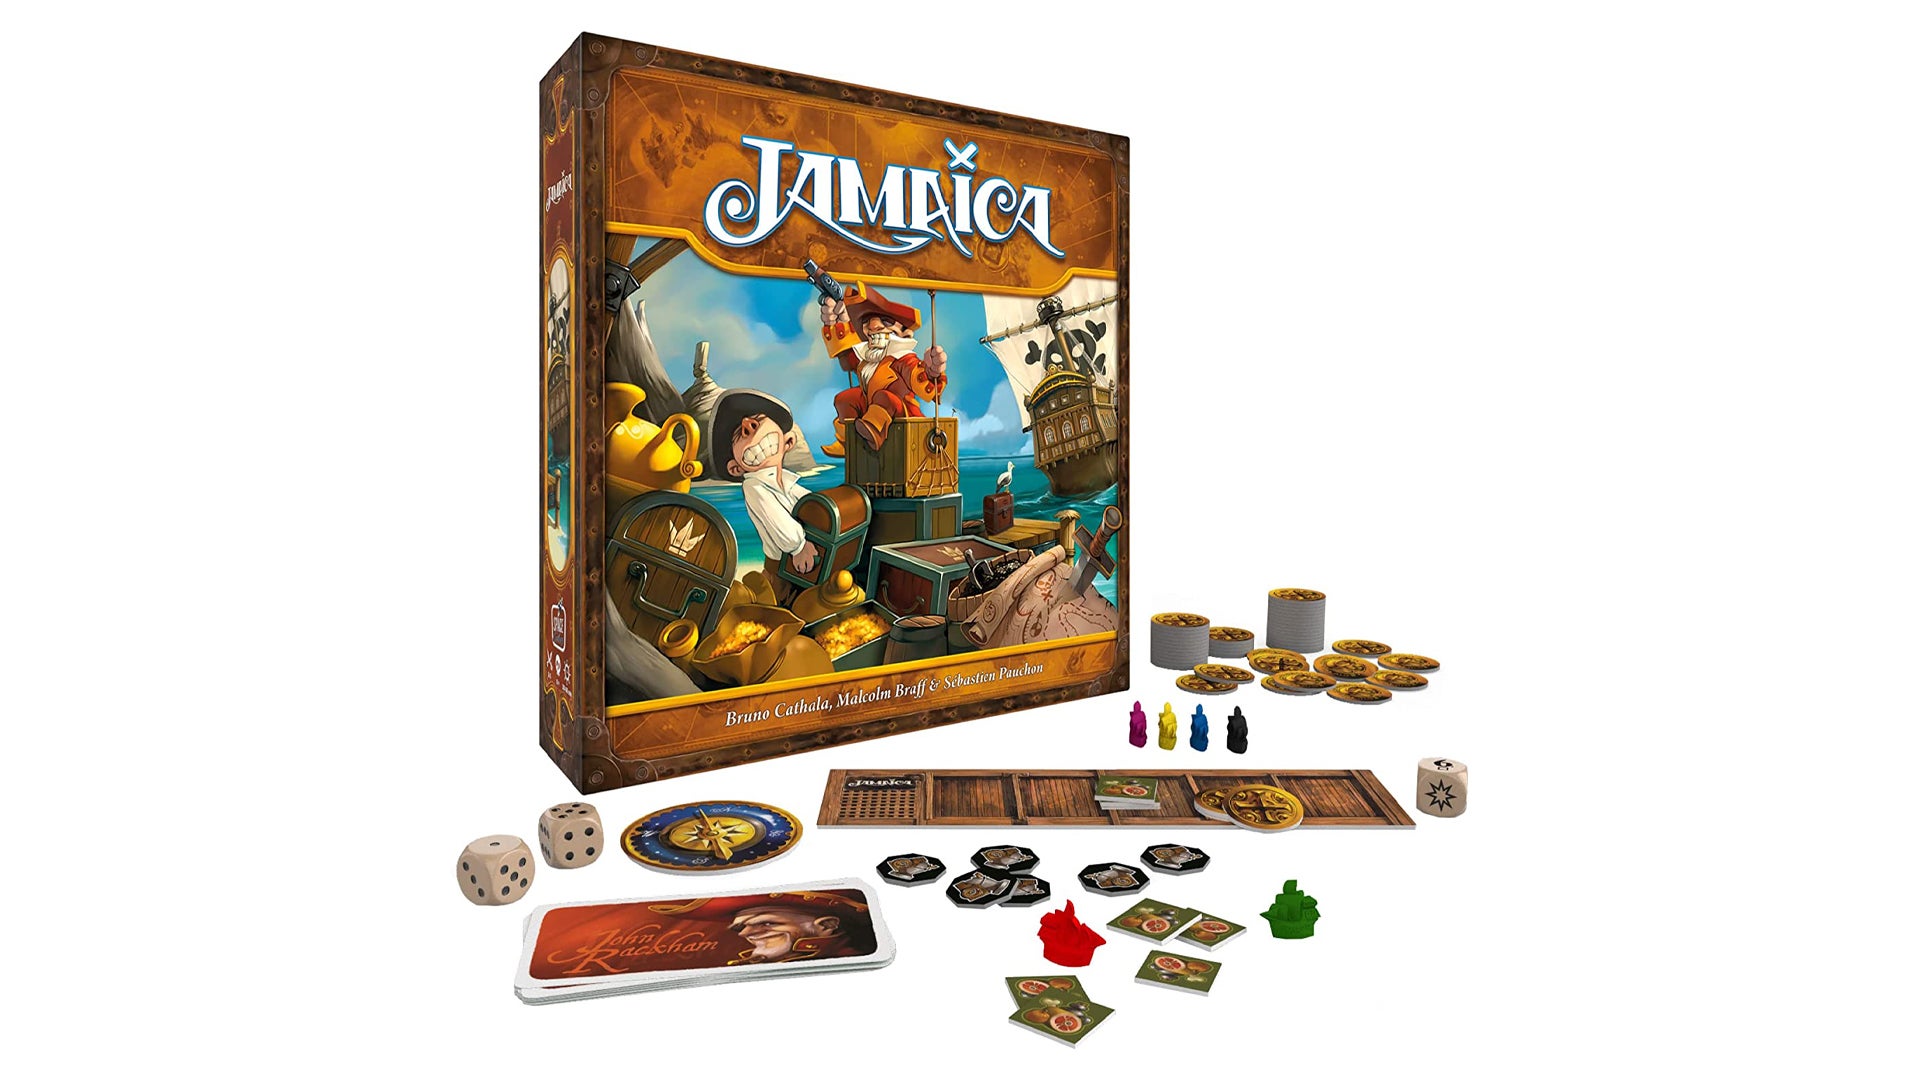 An image of the box for the Jamaica board game.